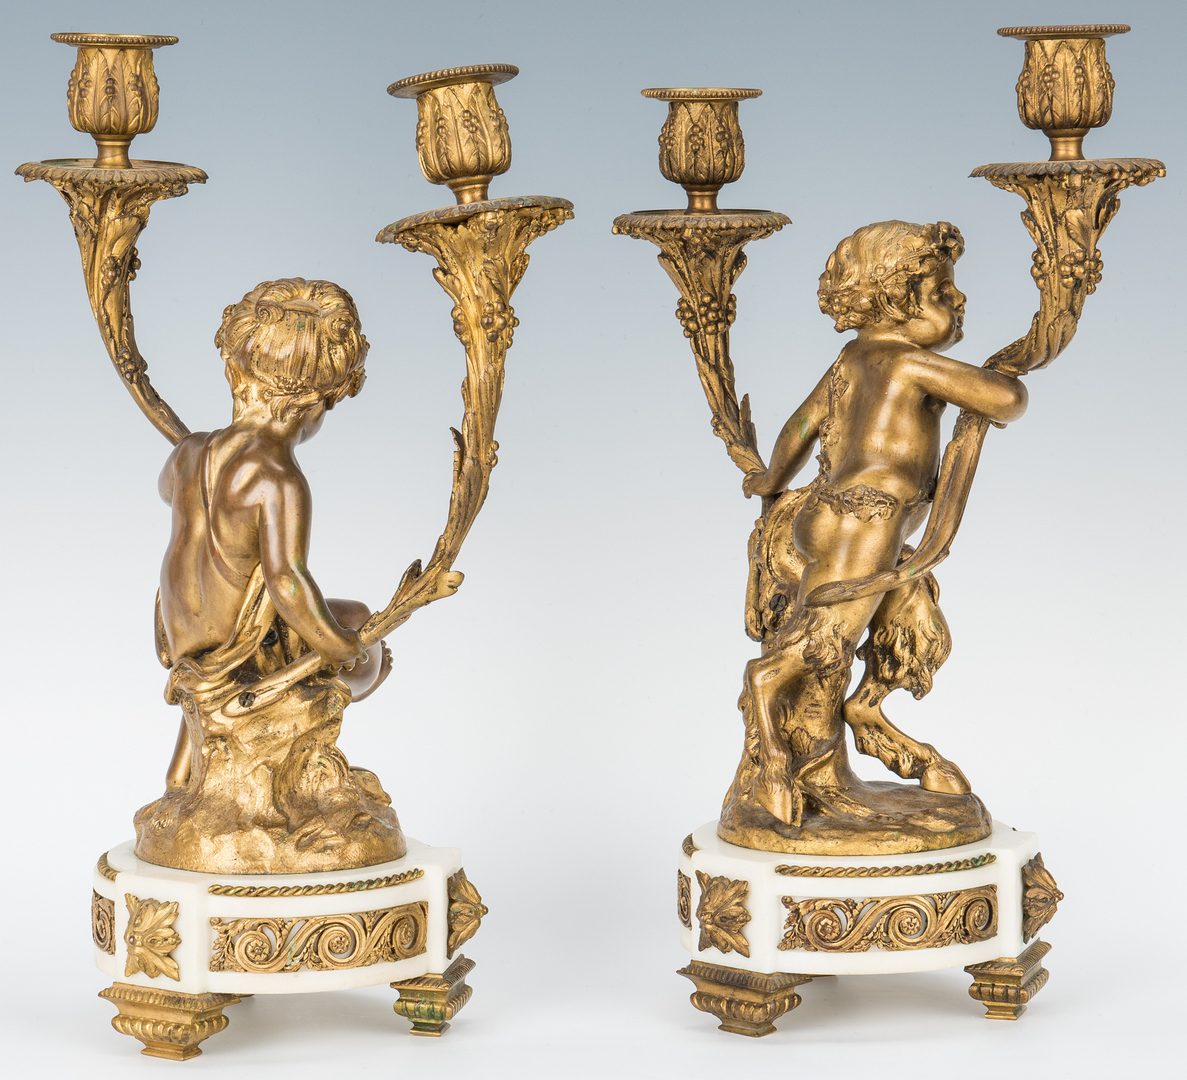 Lot 70: French Ormolu Clock and Garniture, Clodion